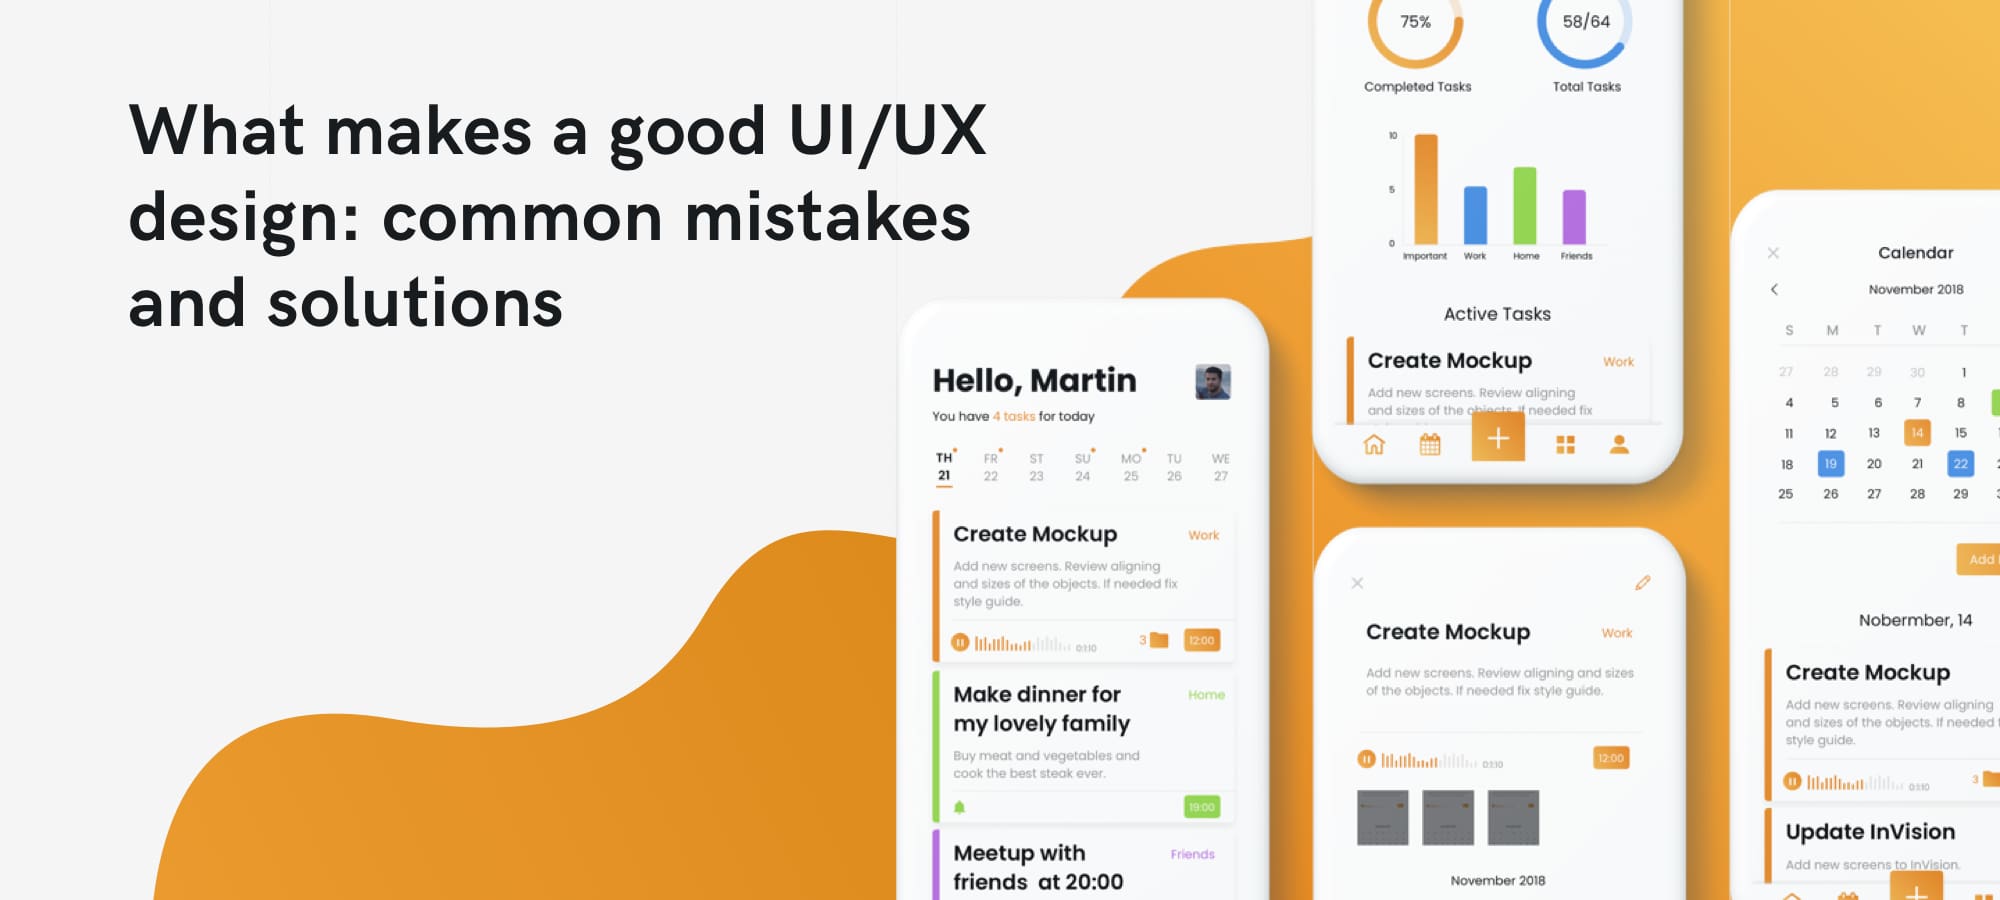 What Makes a Good UI/UX Design: Common Mistakes and Solutions